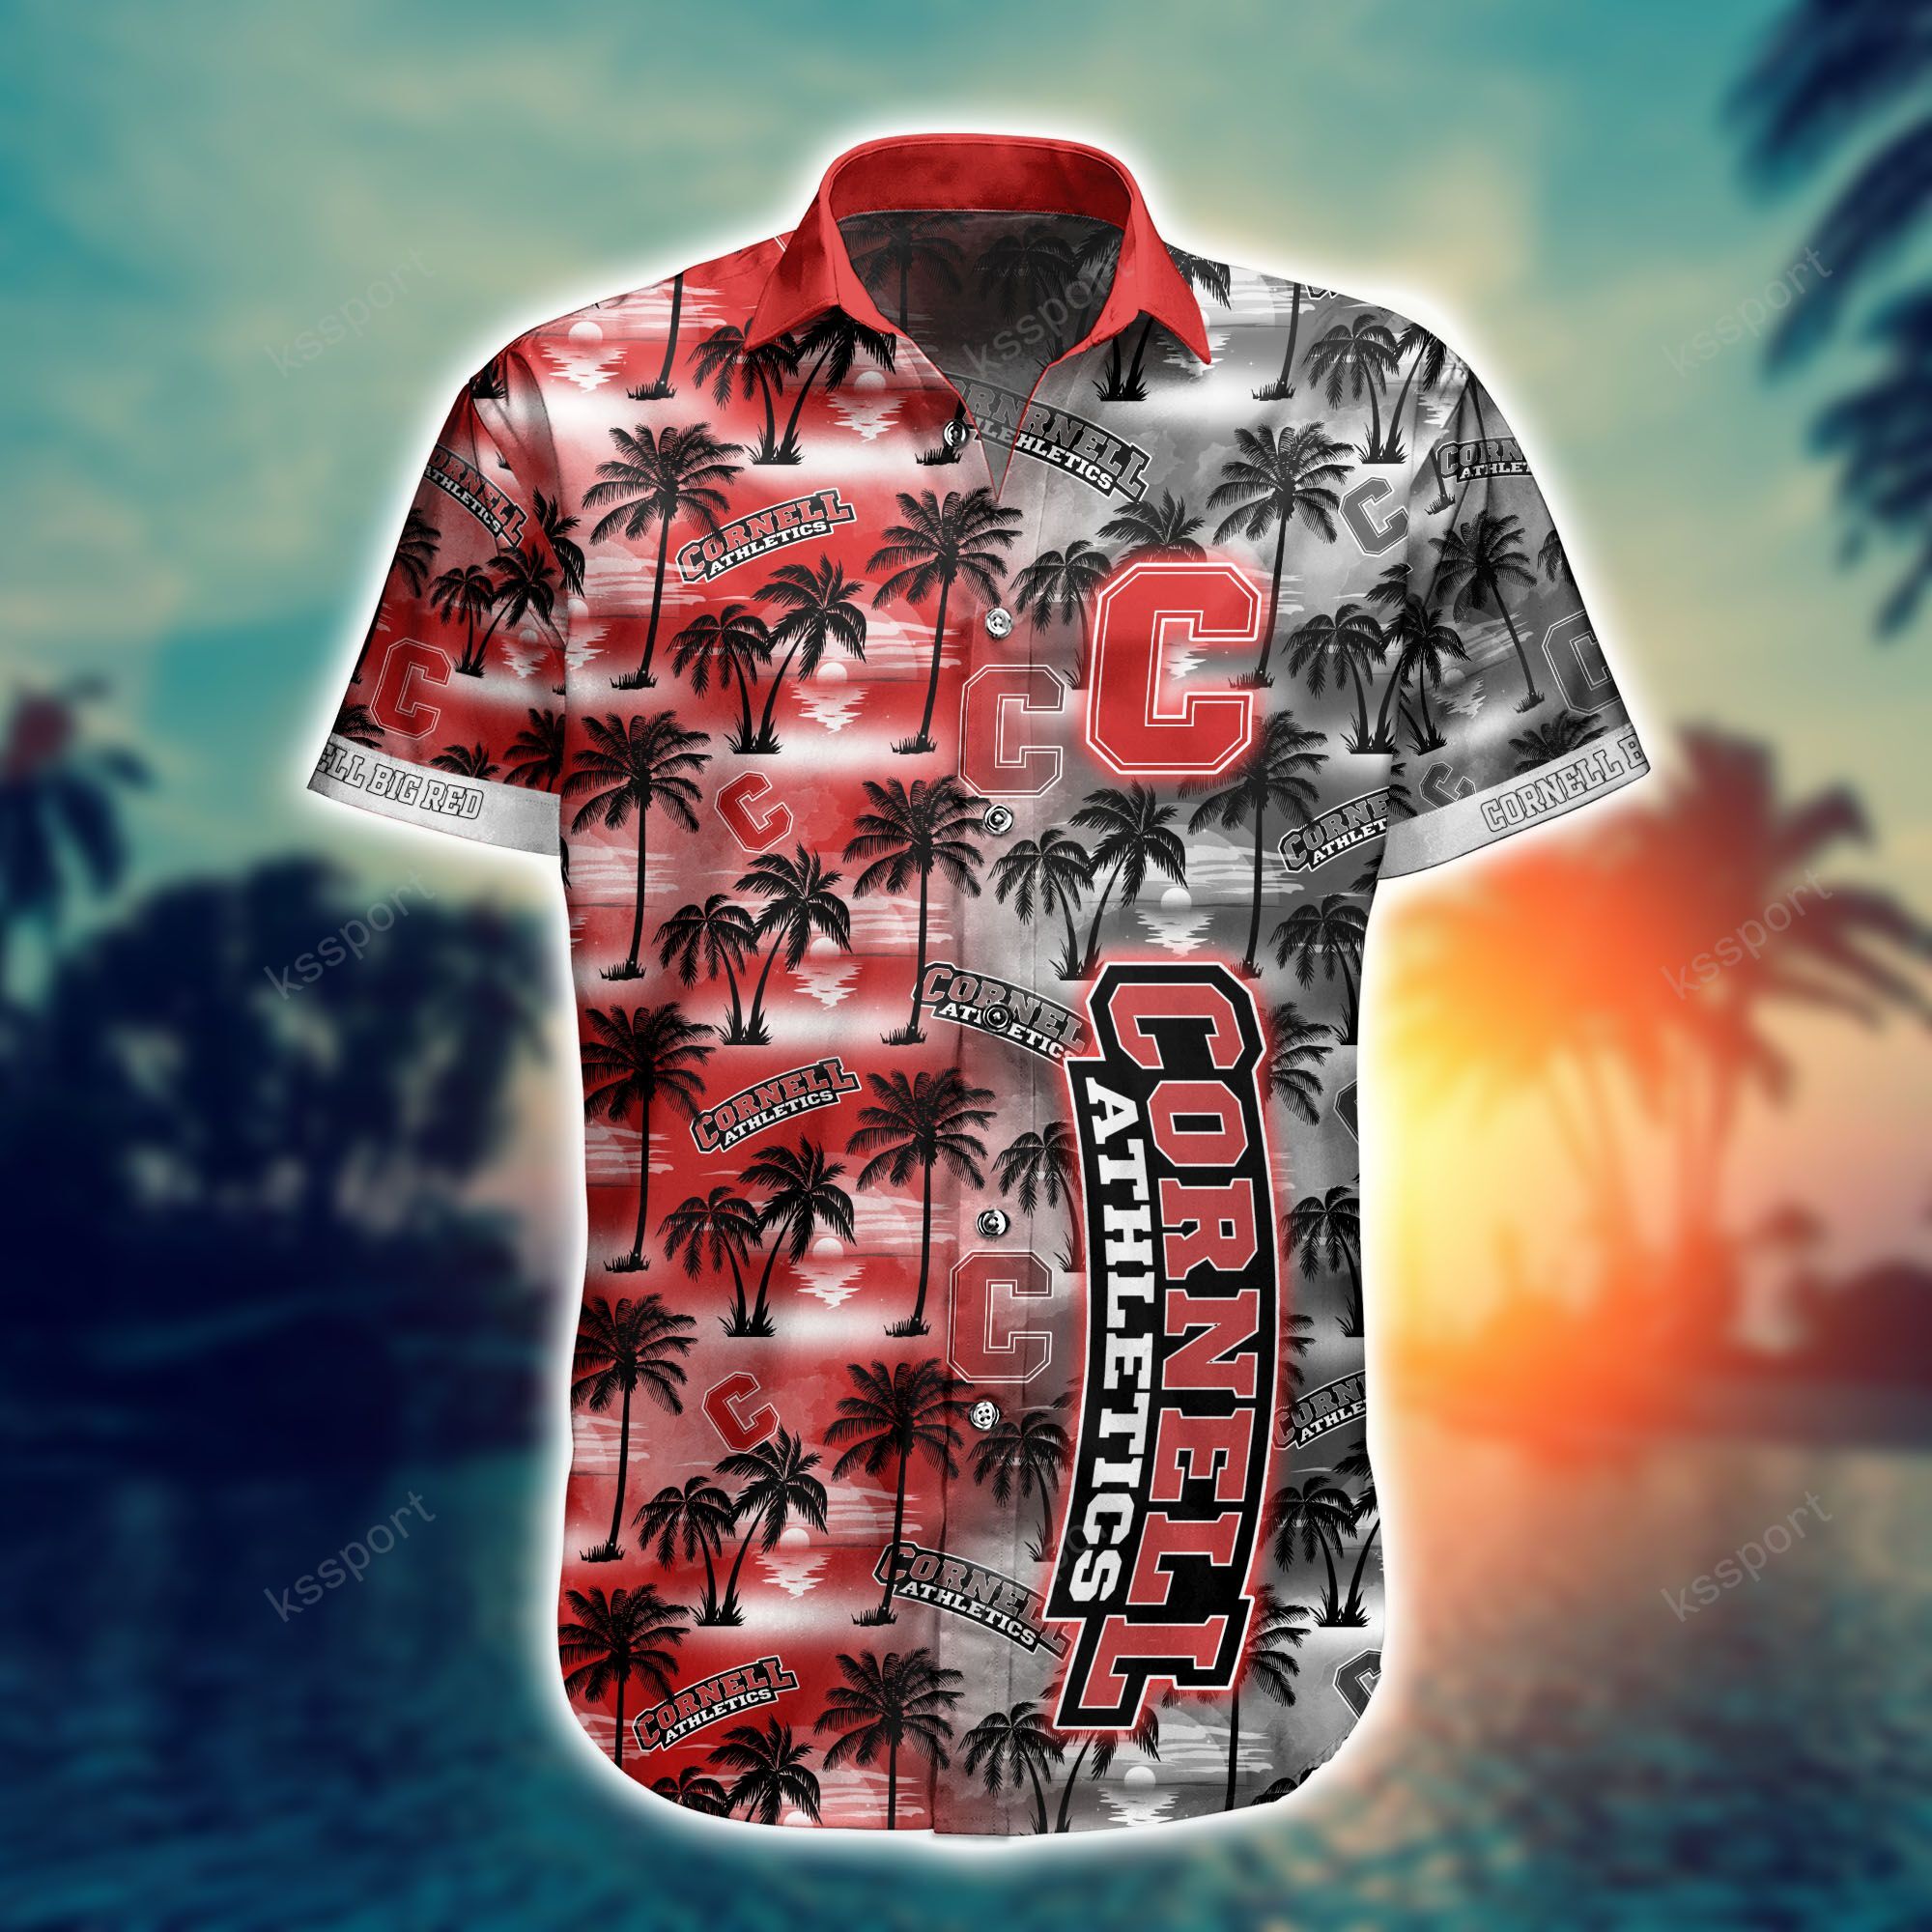 Top cool Hawaiian shirt 2022 - Make sure you get yours today before they run out! 110